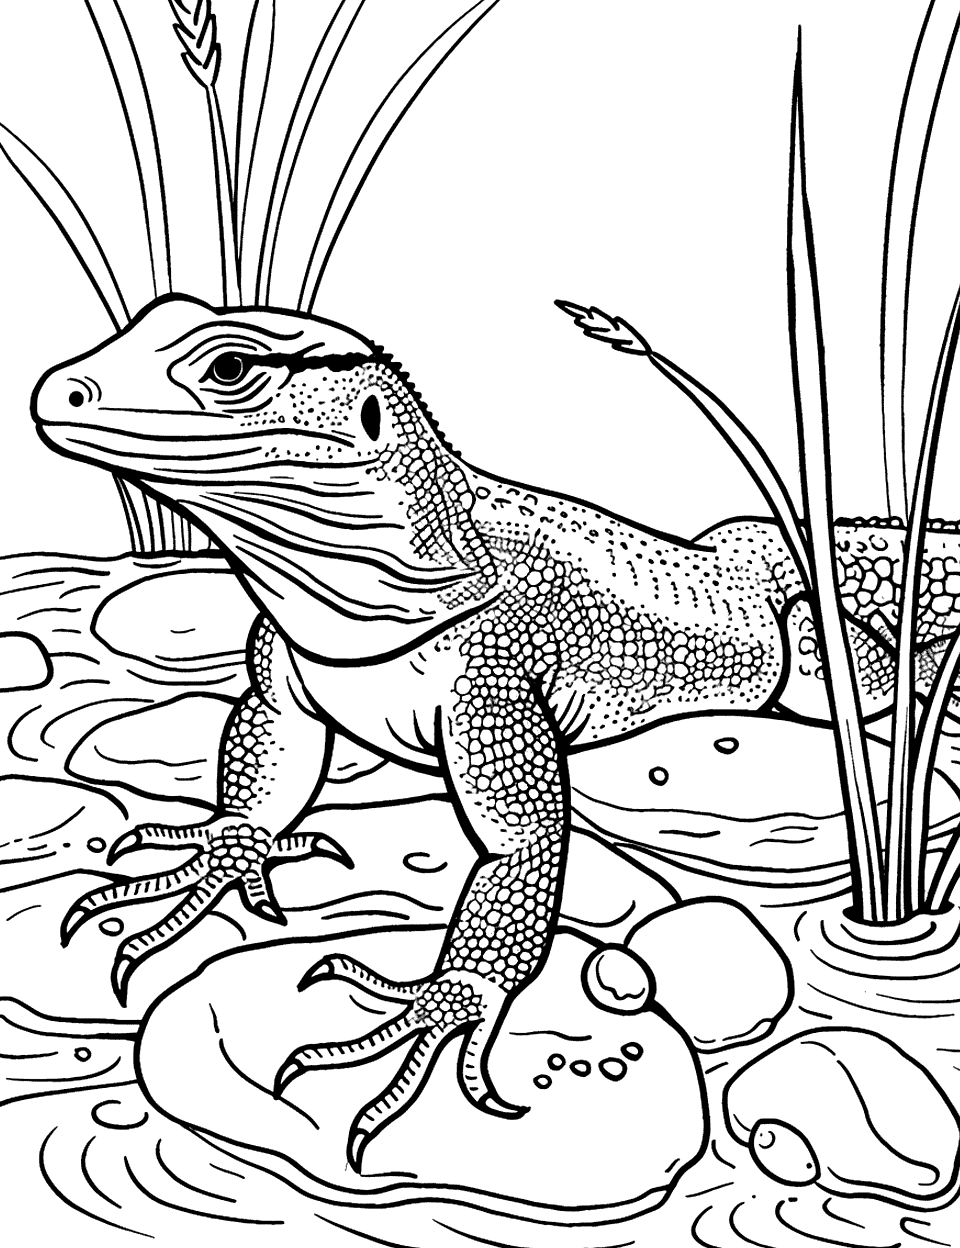 Monitor Lizard by the River Coloring Page - A monitor lizard next to a river, with stones and a few reeds in the background.